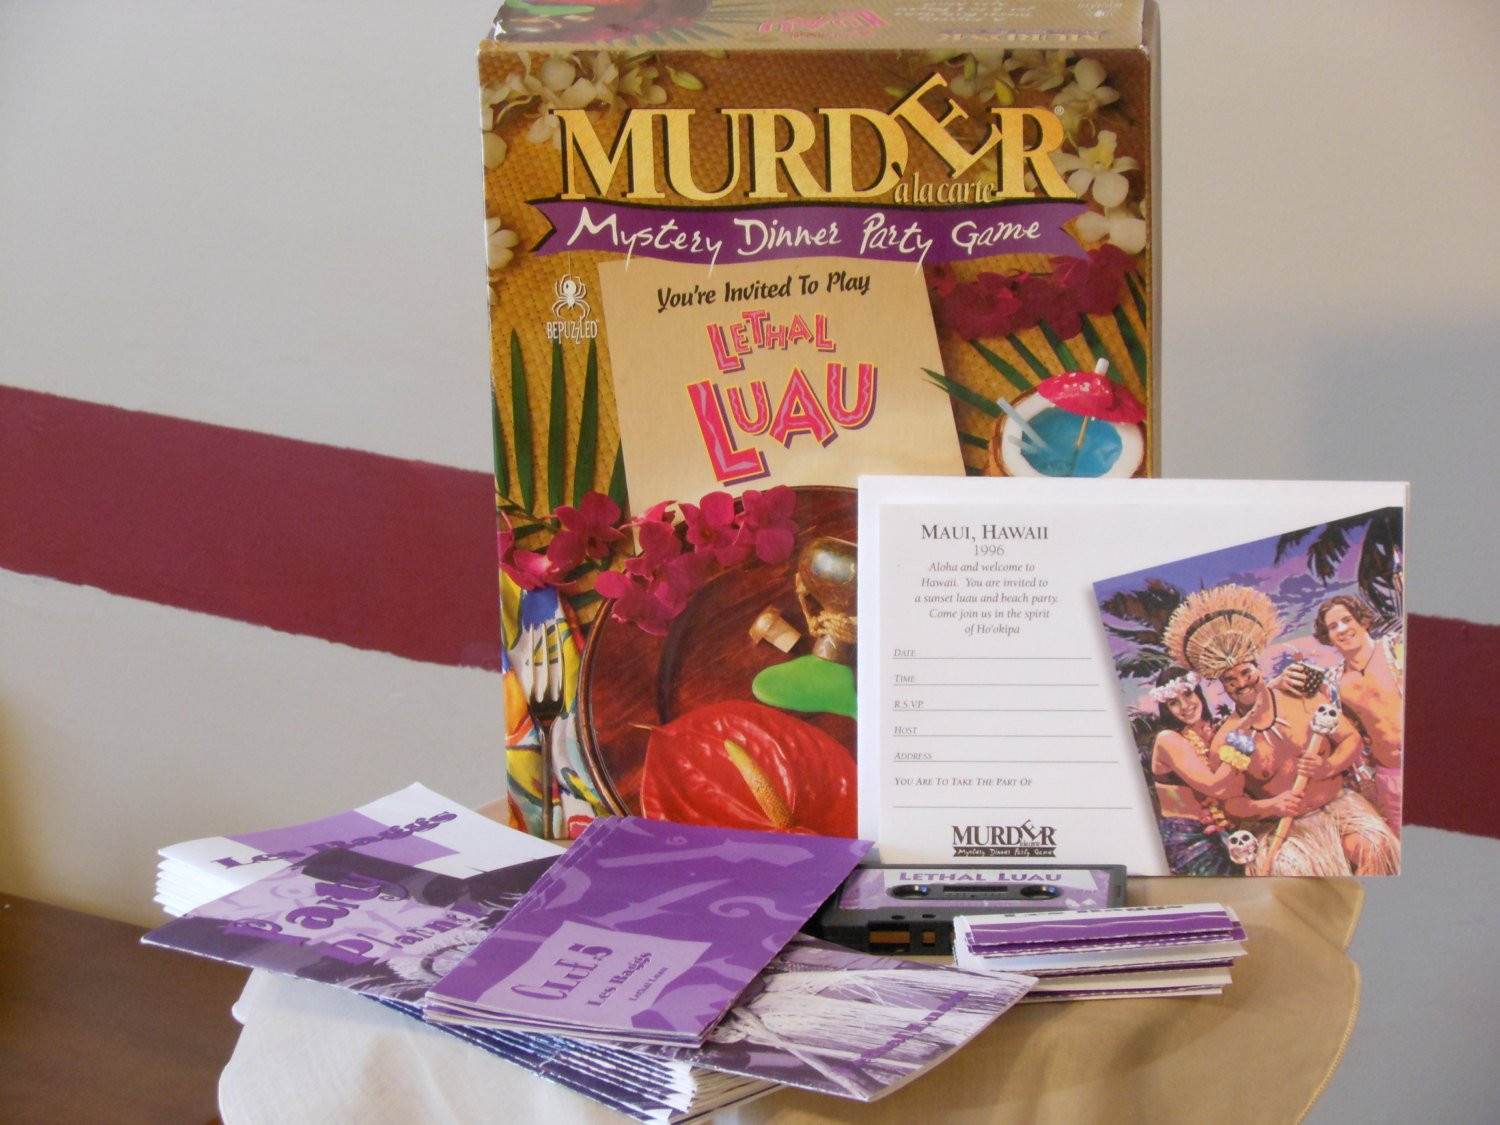 Murder Mystery Dinner Game
 Lethal Luau Murder Mystery Dinner Party Game by RandysGallery